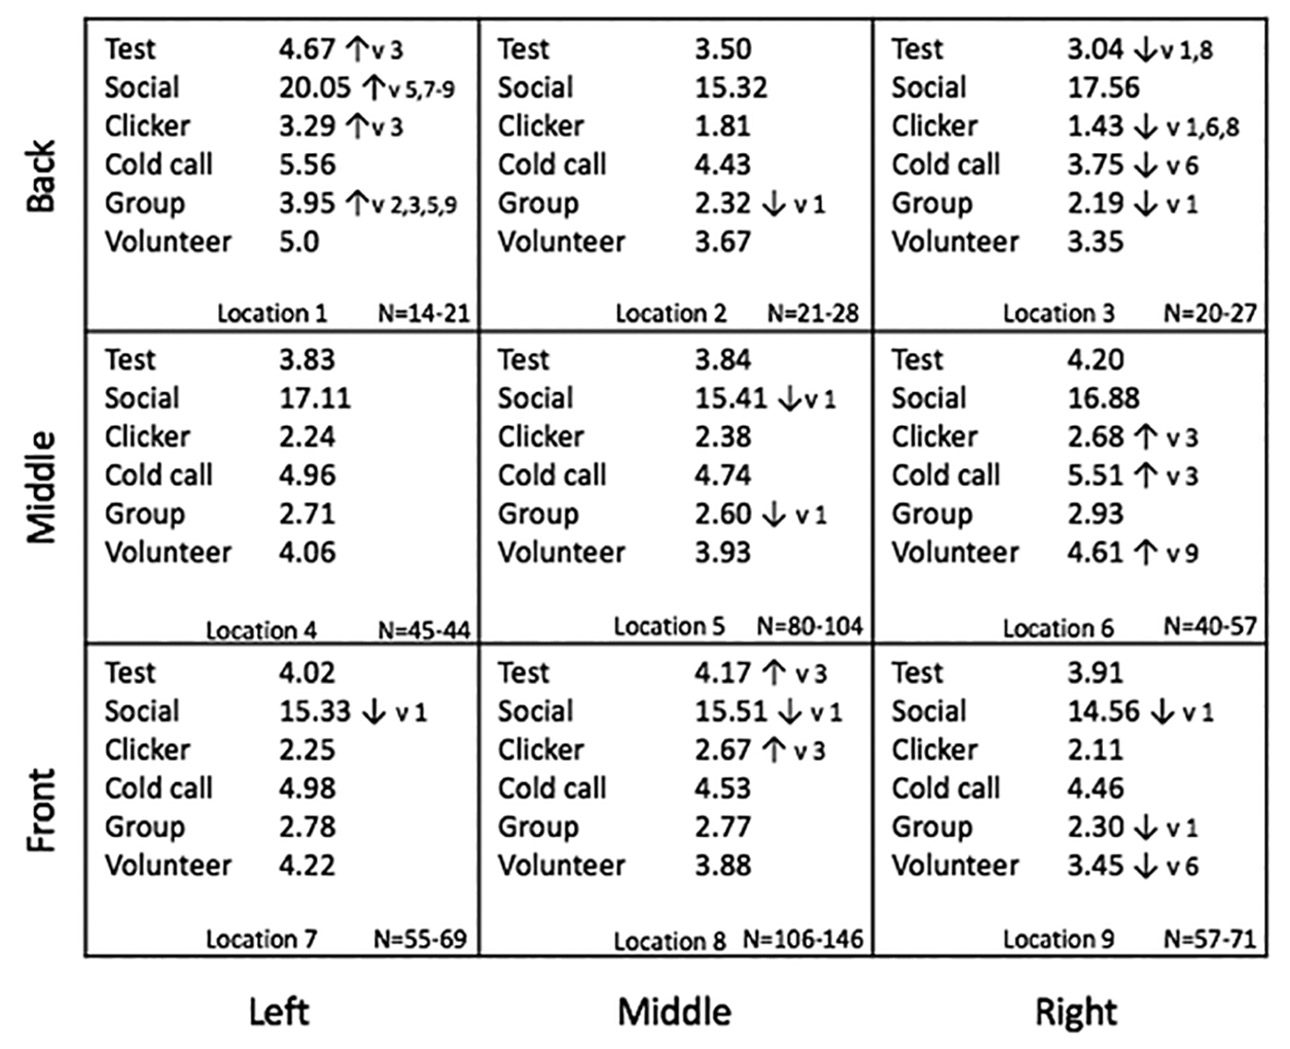 Active learning anxiety levels by room location (right is the teacher’s right; front is the front of the classroom).